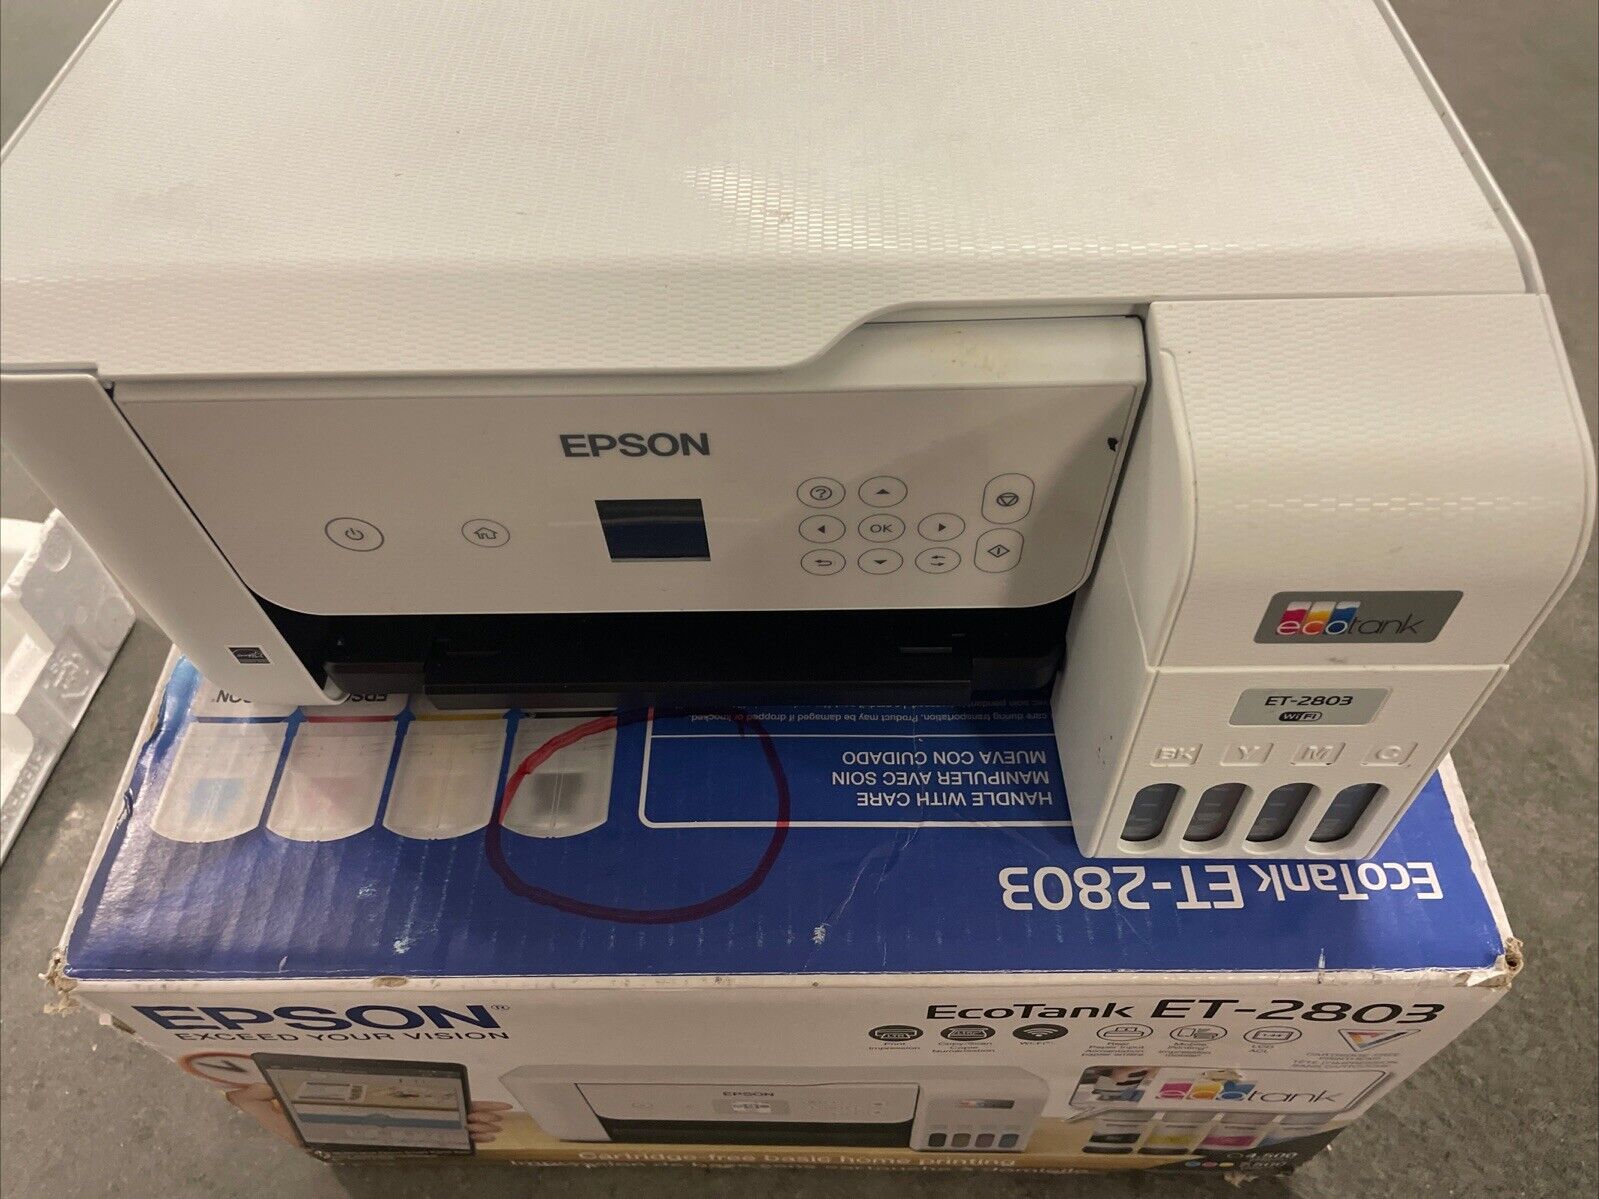 Epson Eco-Tank ET- 2803 Color All-in-One printer Used / working in Open Box